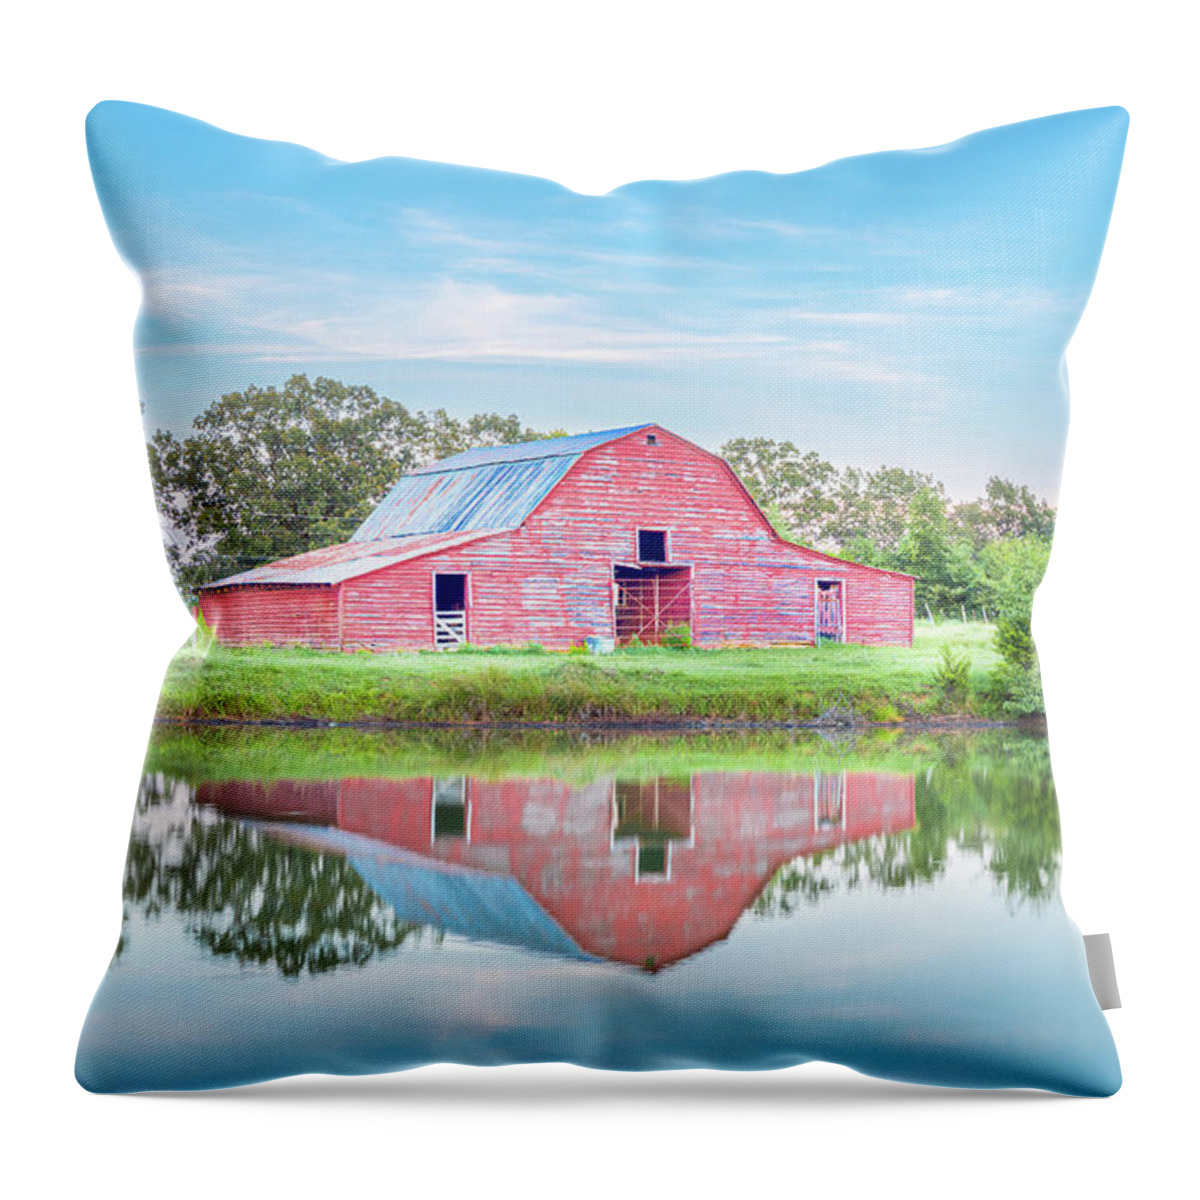 Red Barn Throw Pillow featuring the photograph Rural Country Red Barn Reflections by Jordan Hill